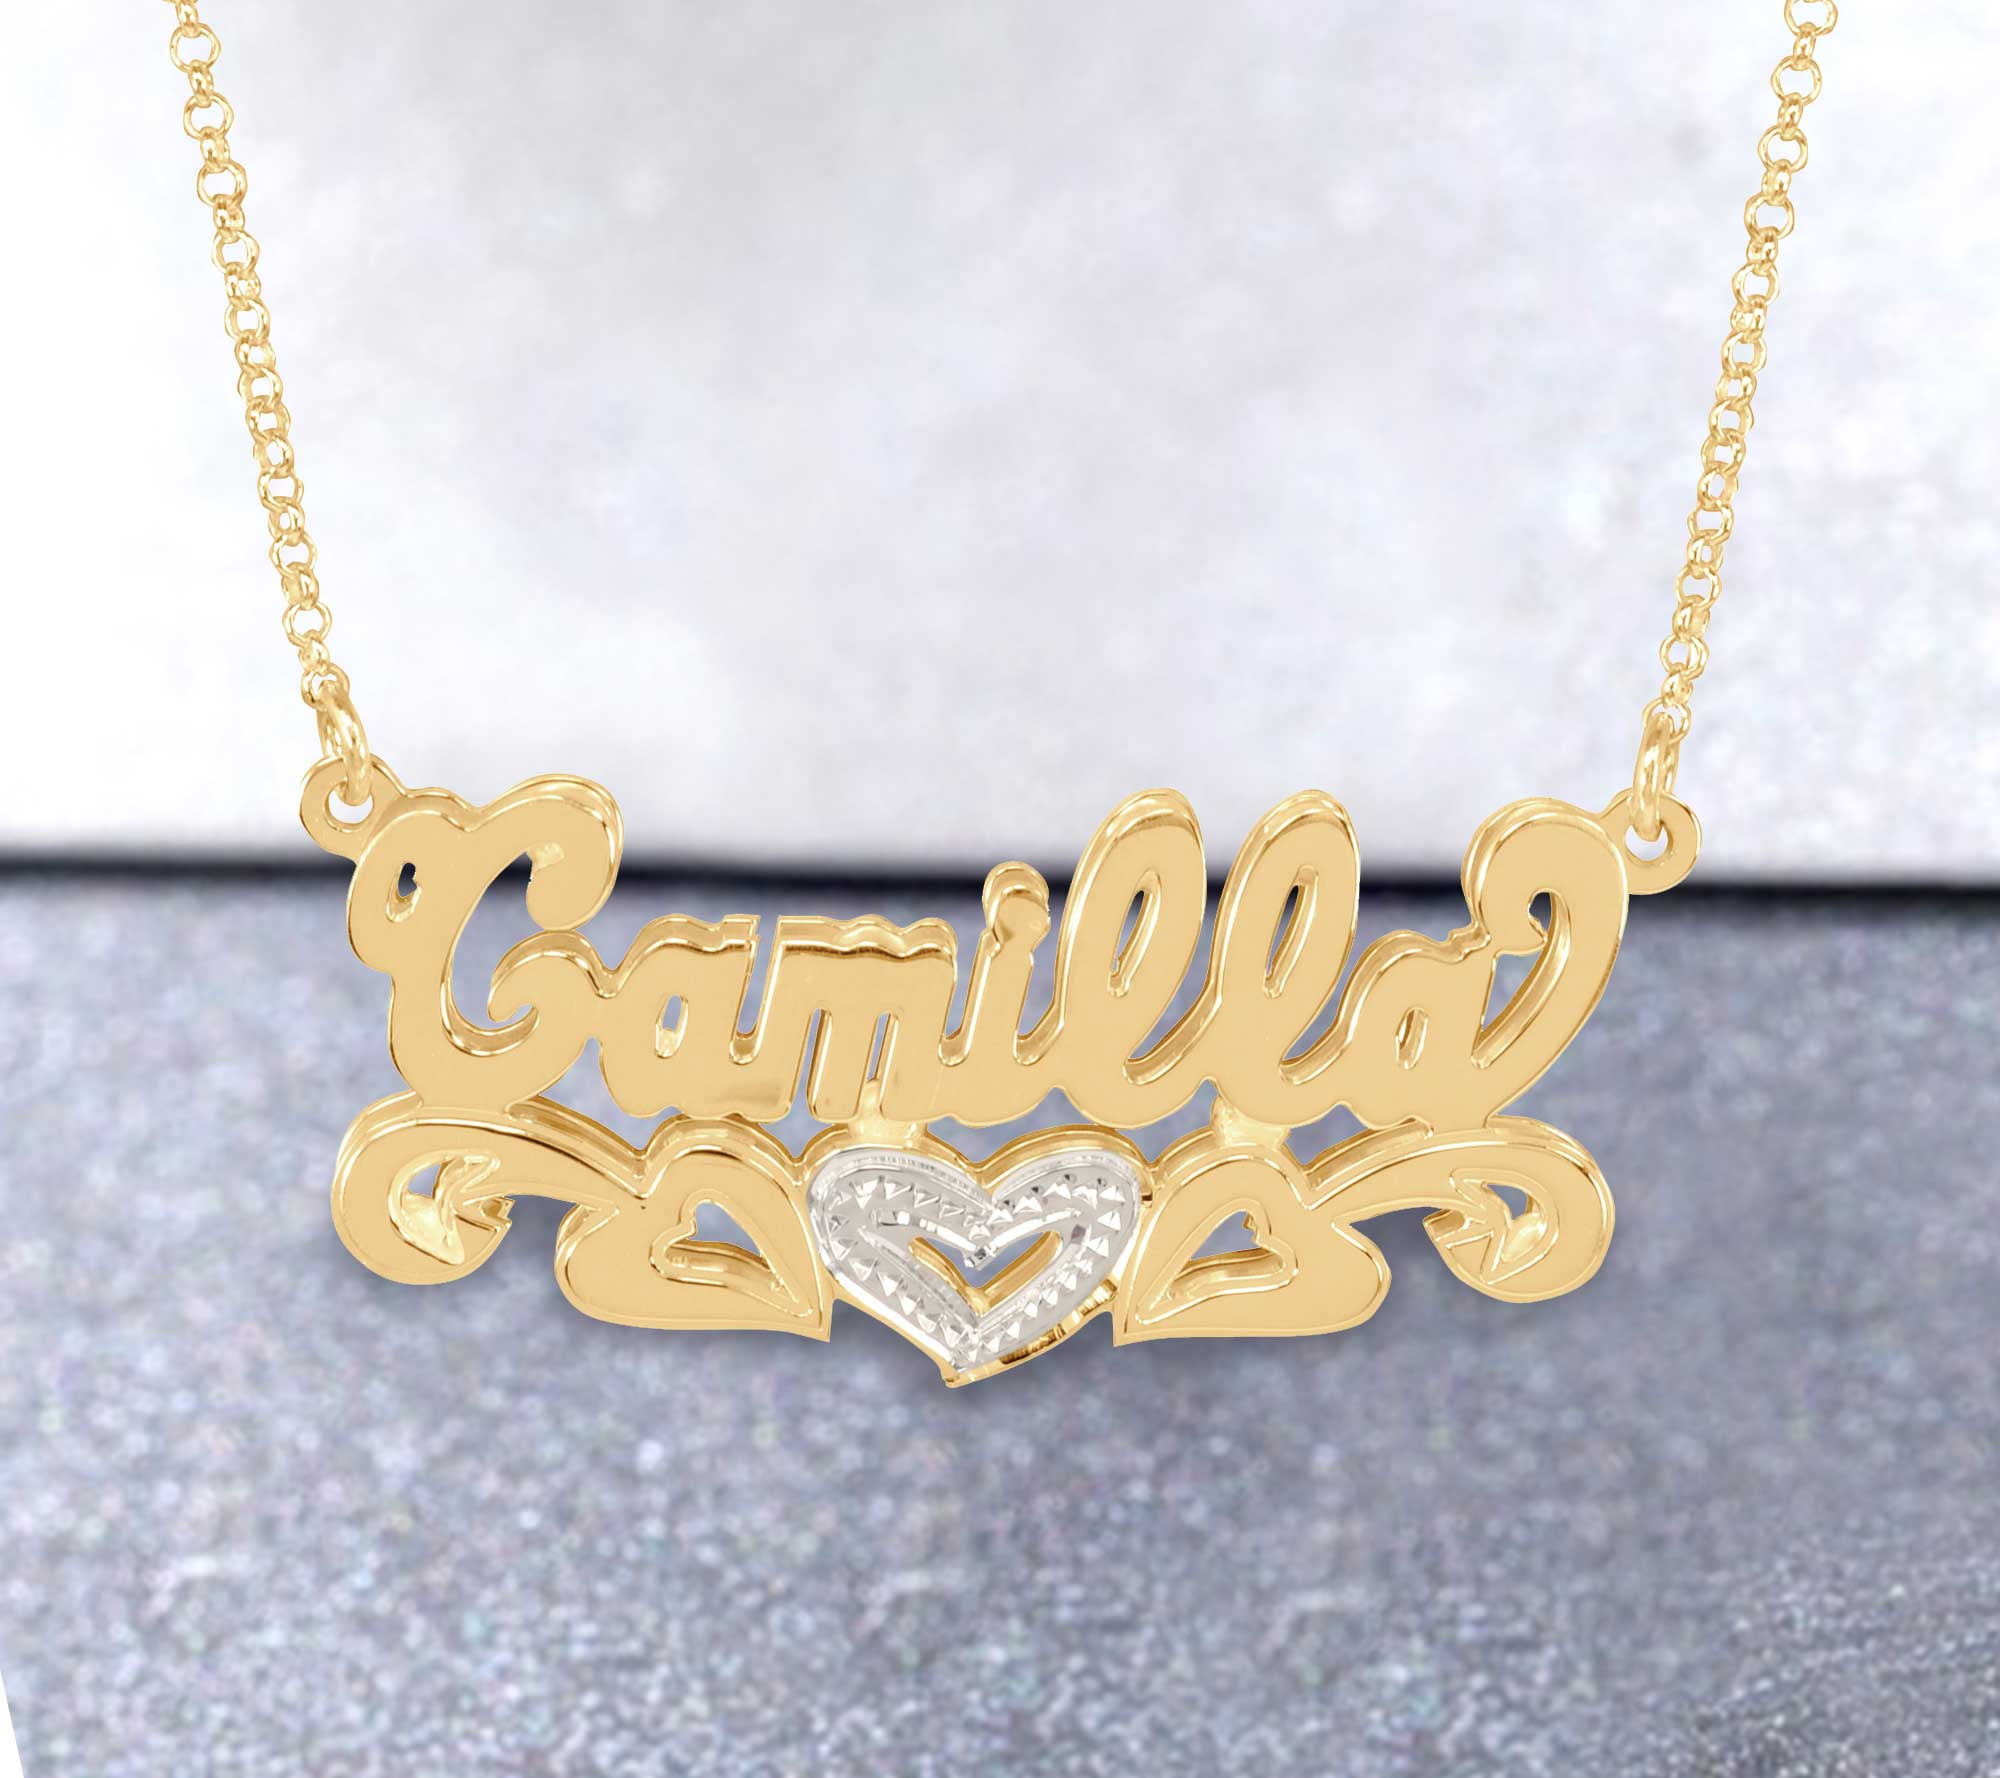 Heights Jewelers Personalized Double D Bling Name Necklace In K Gold Plated Sterling Silver